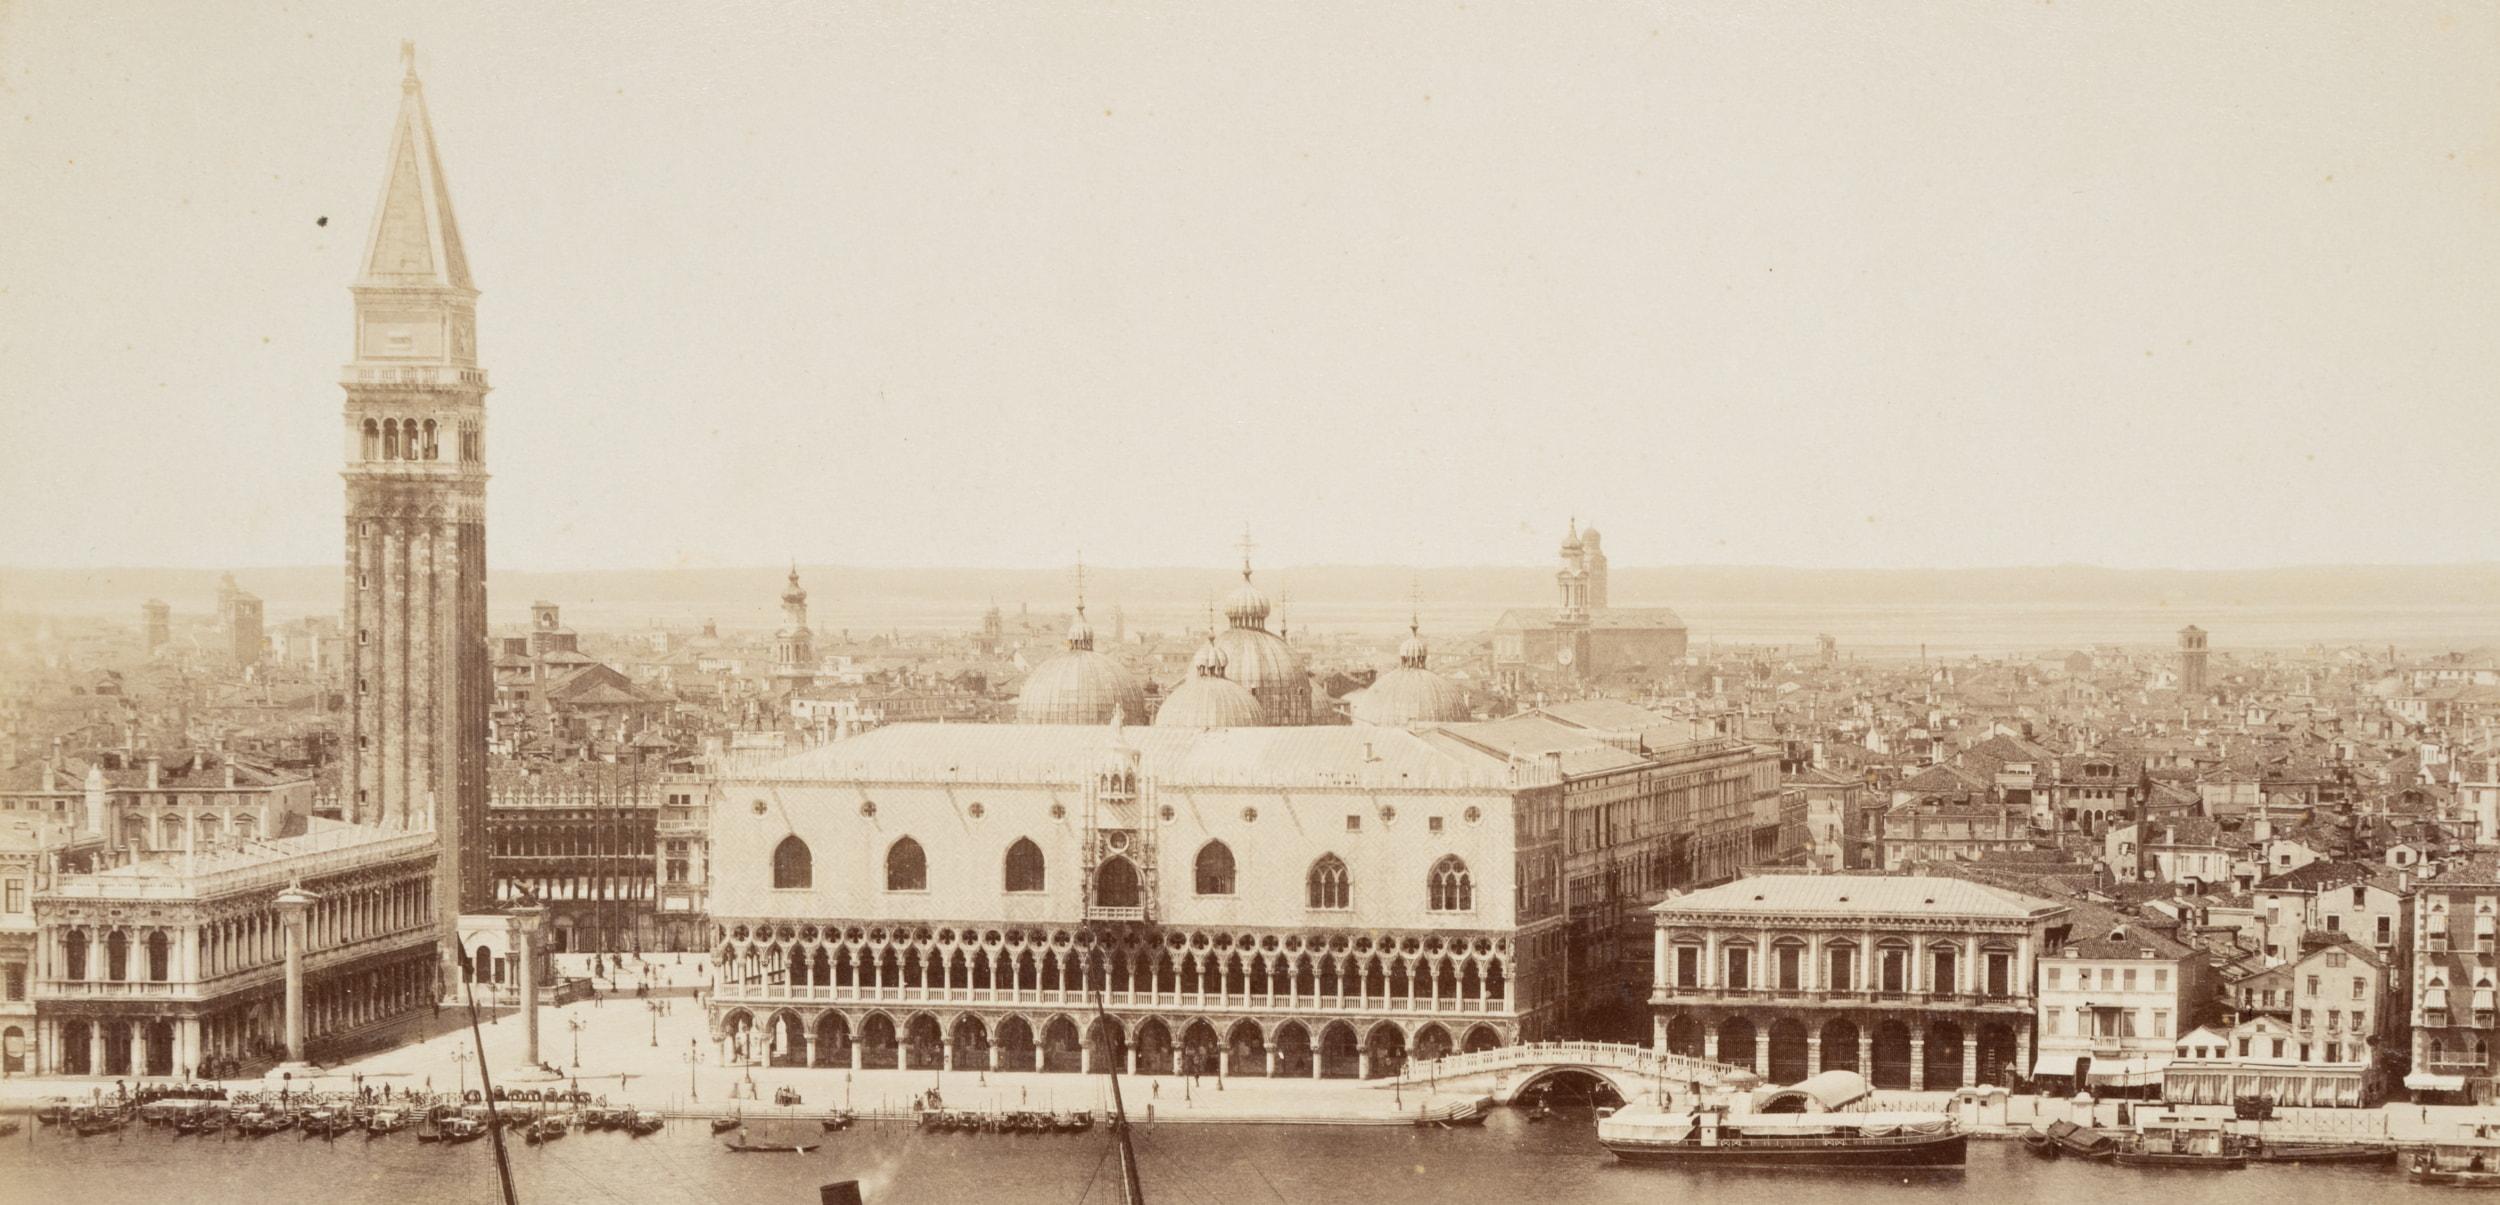 San Marco district with Doge's Palace - Photograph by Carlo Naya